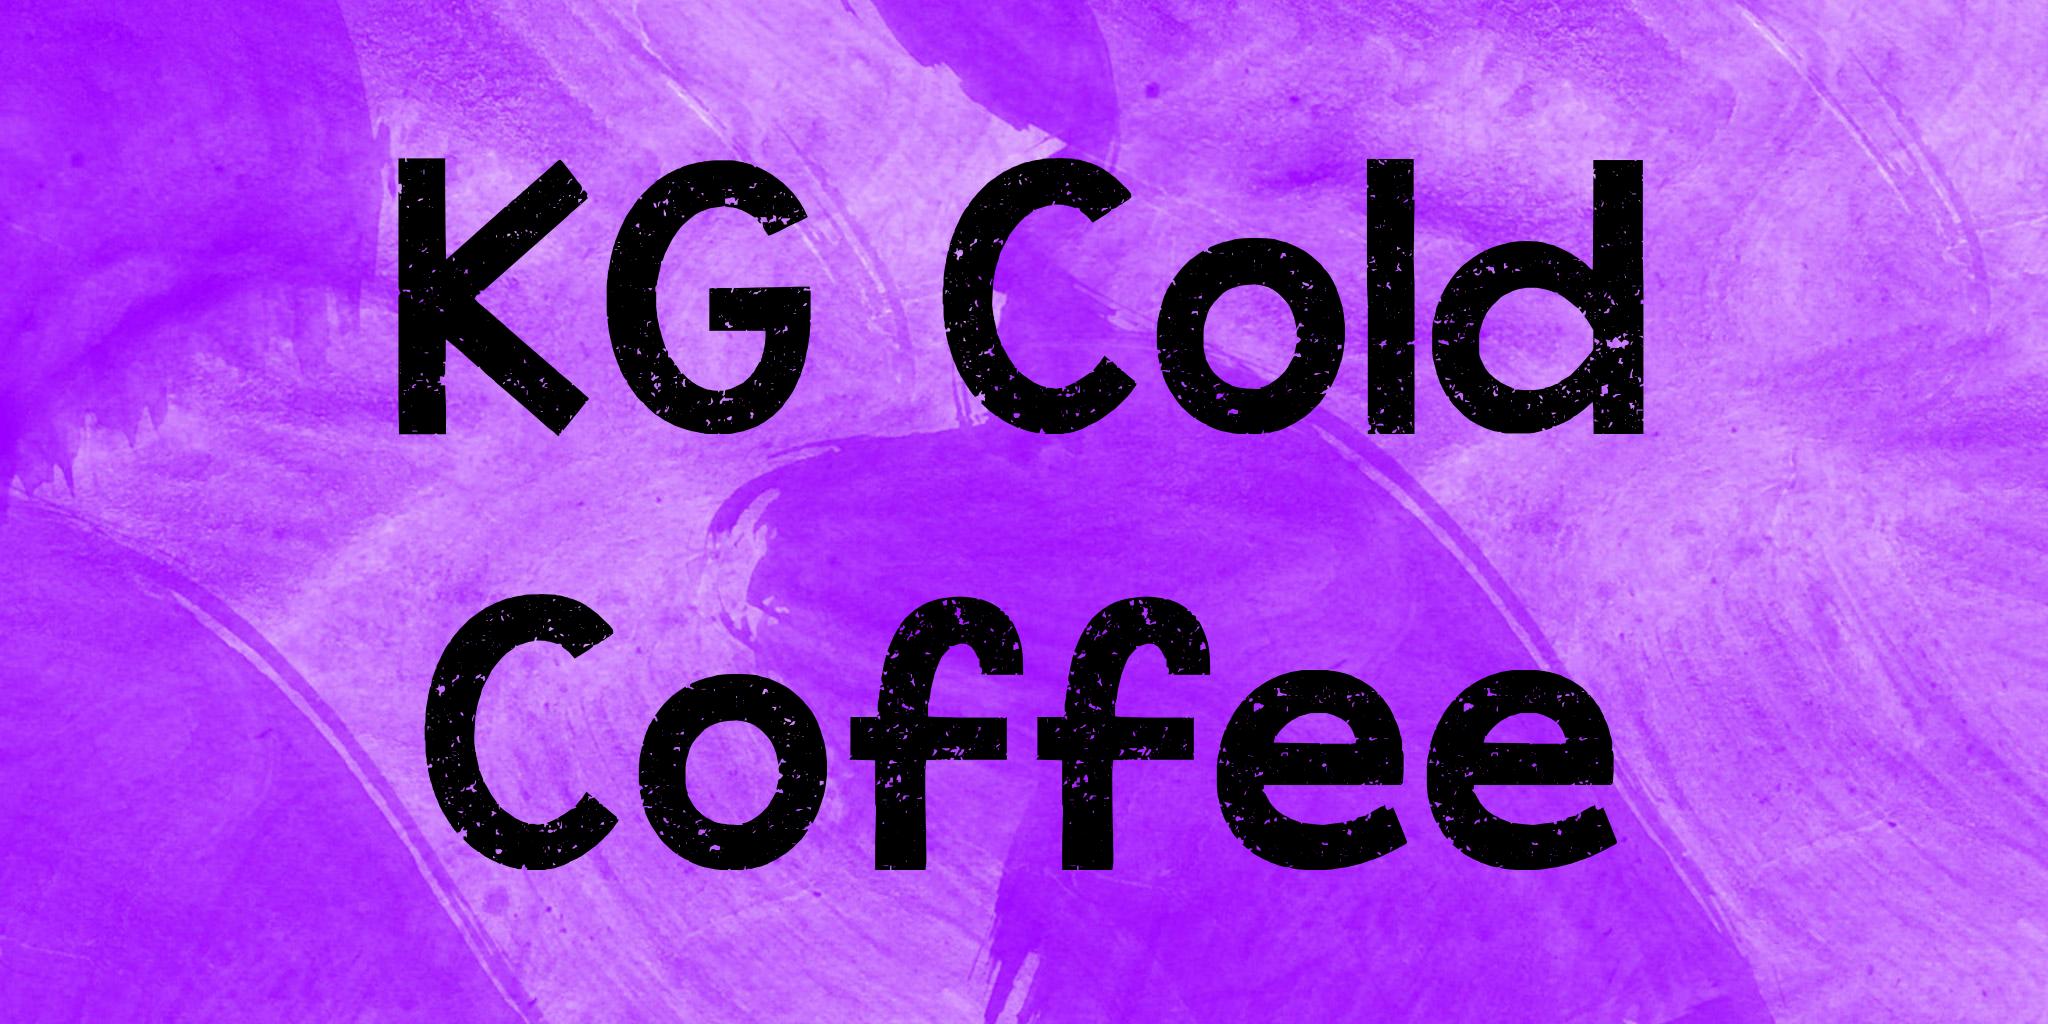 Kg Cold Coffee